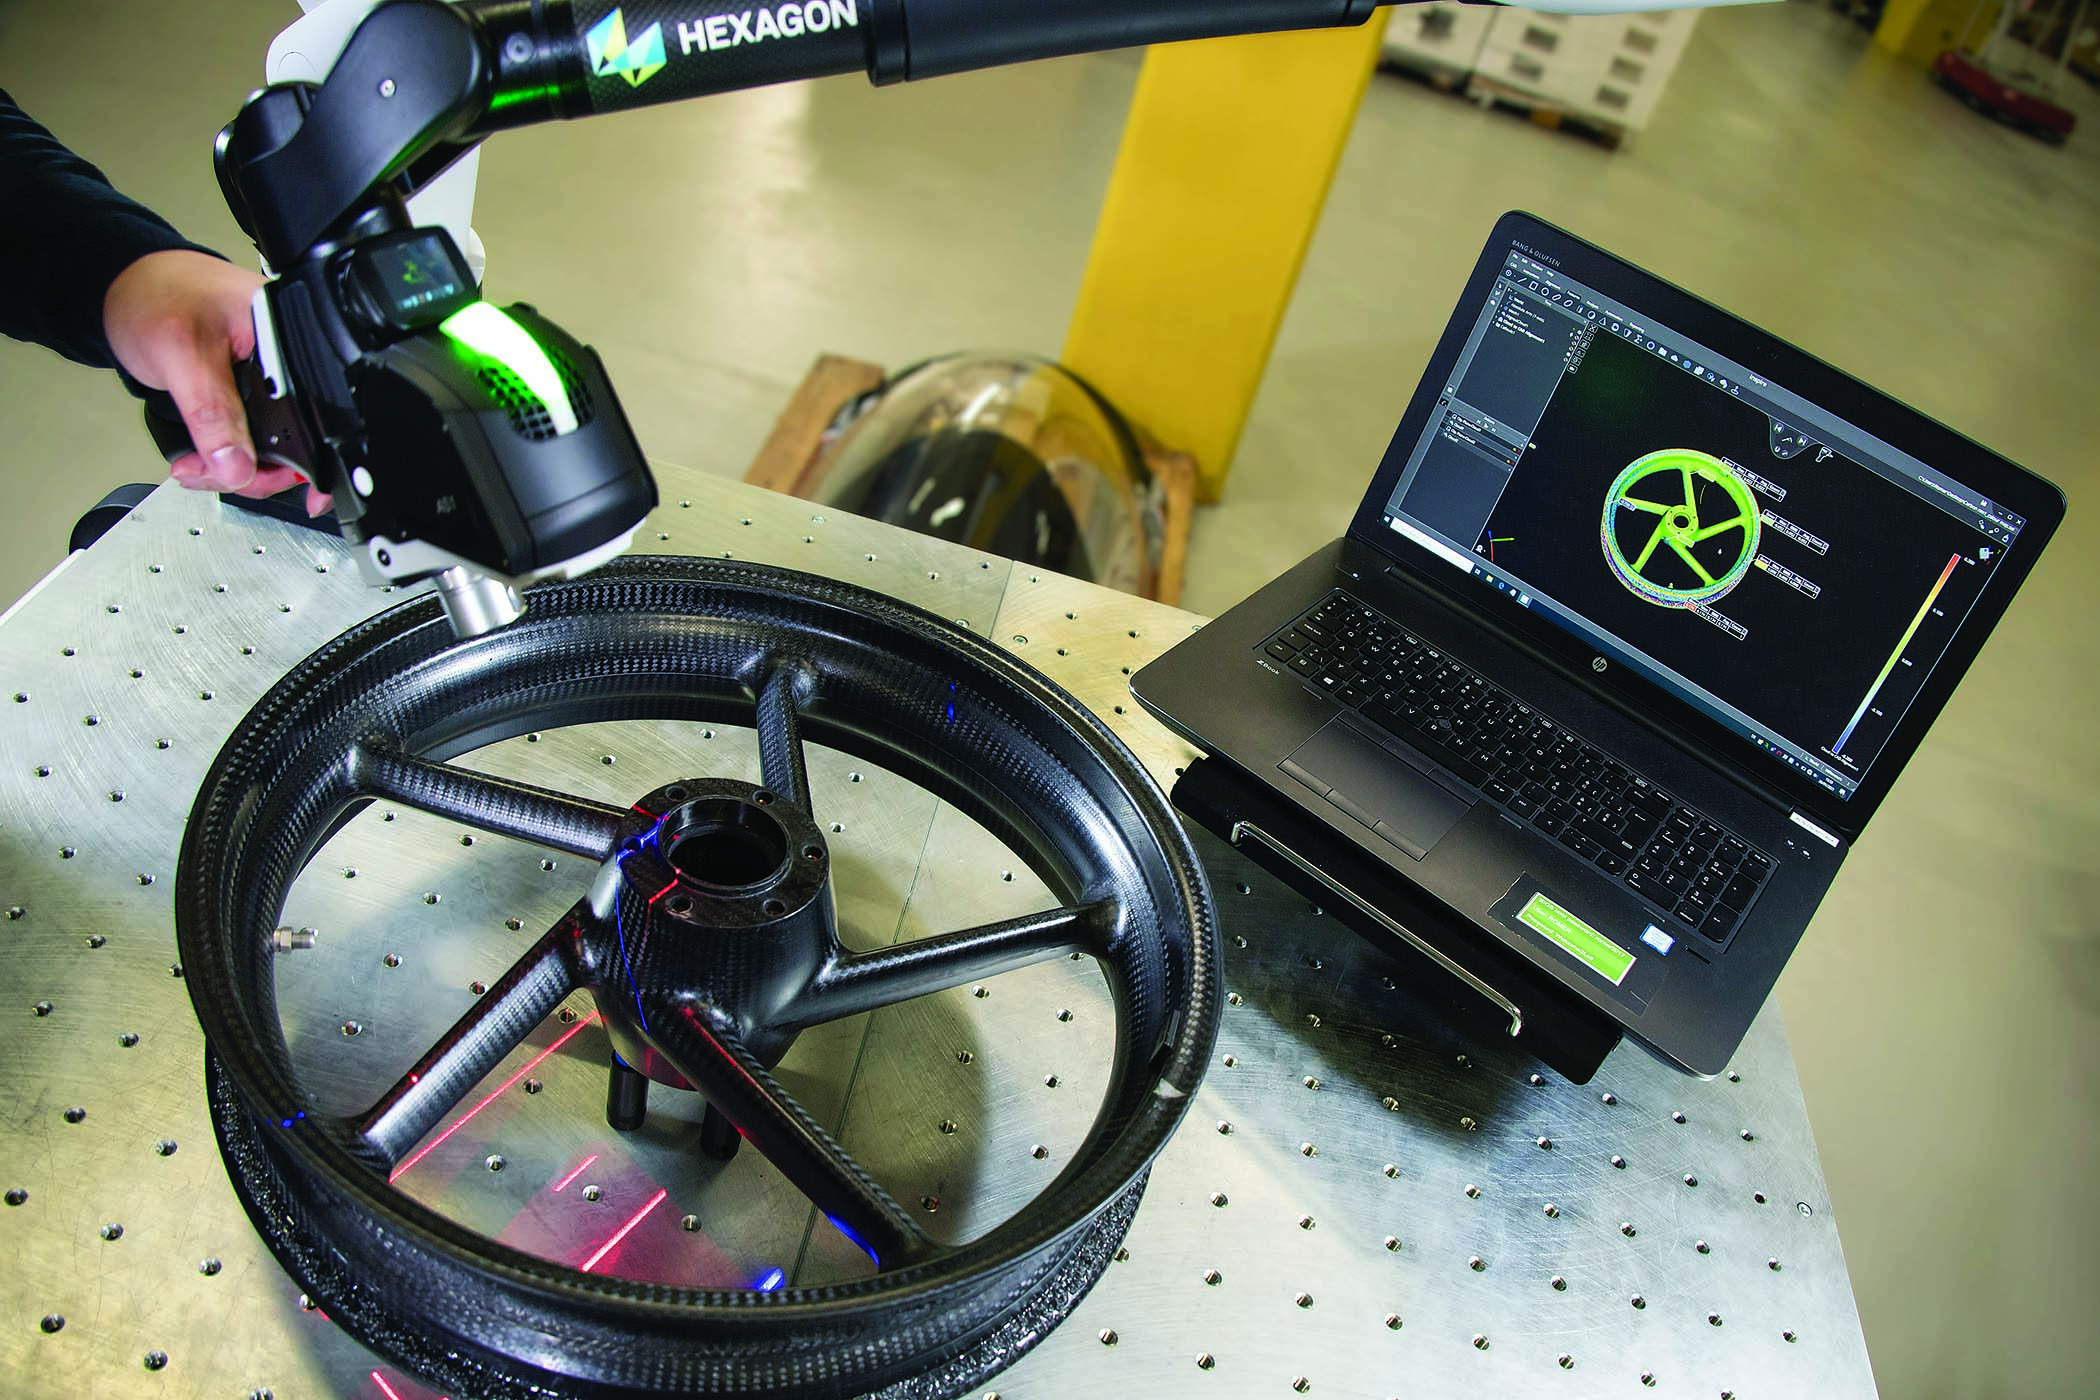 The Absolute Arm AS1 portable CMM is suitable for scanning challenging surfaces.